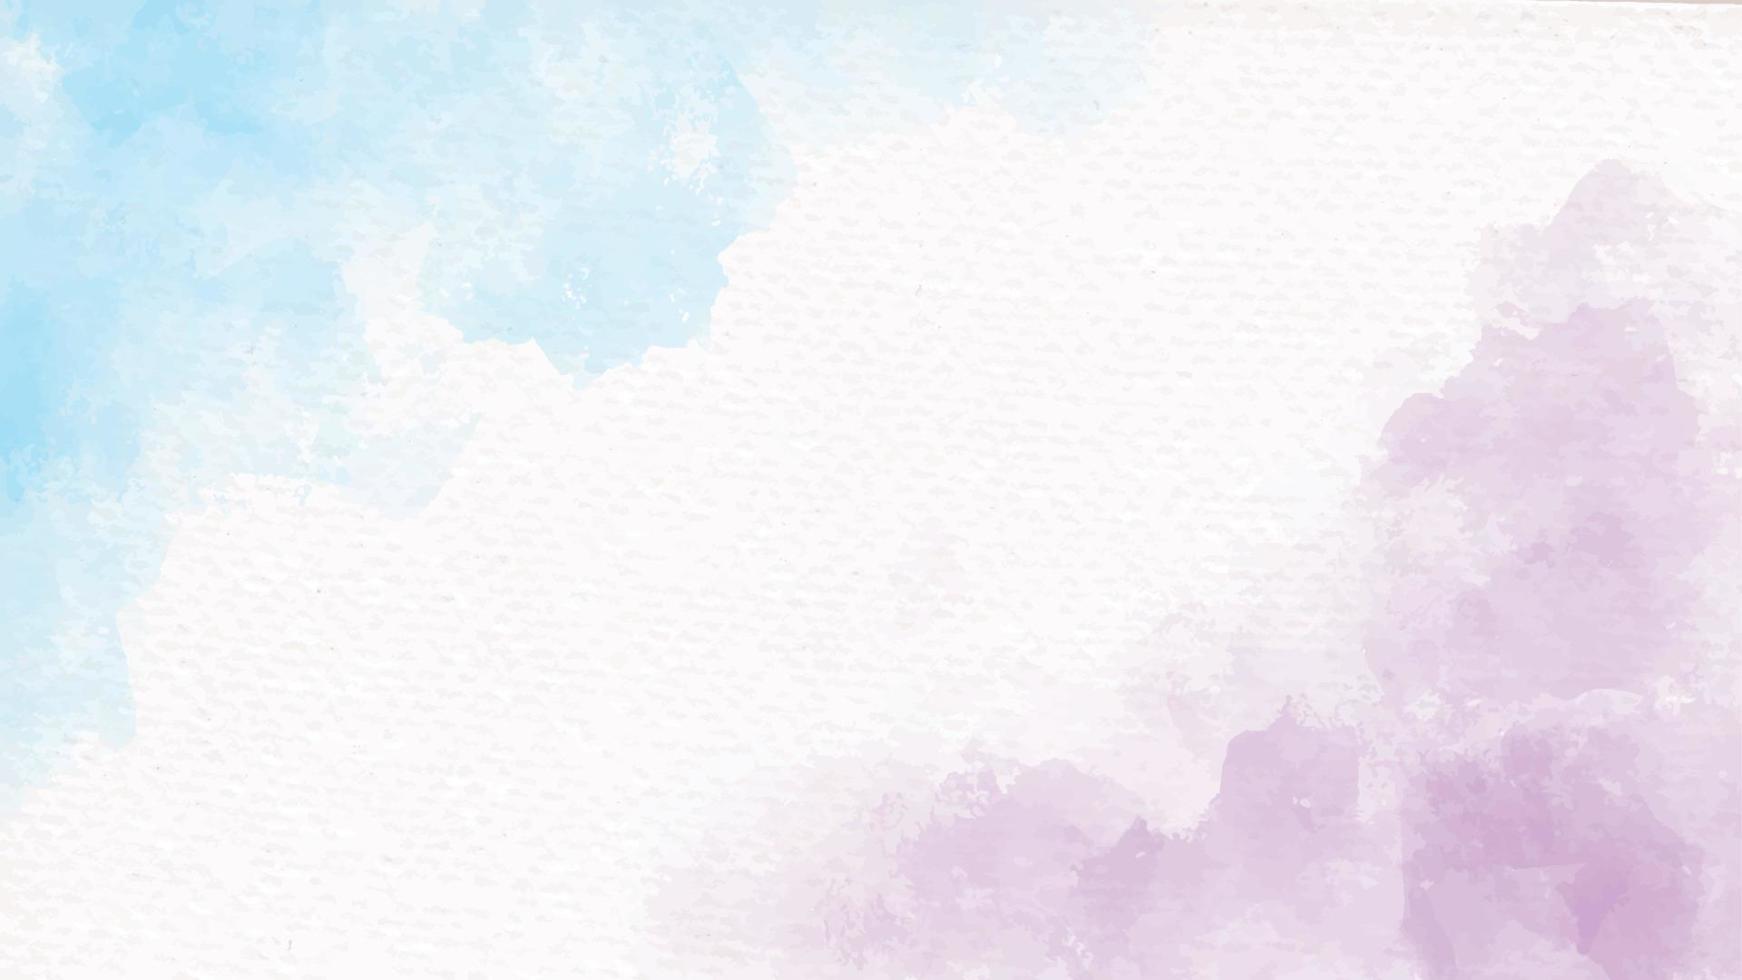 blue and violet rainbow pastel unicorn girly watercolor on paper abstract background vector